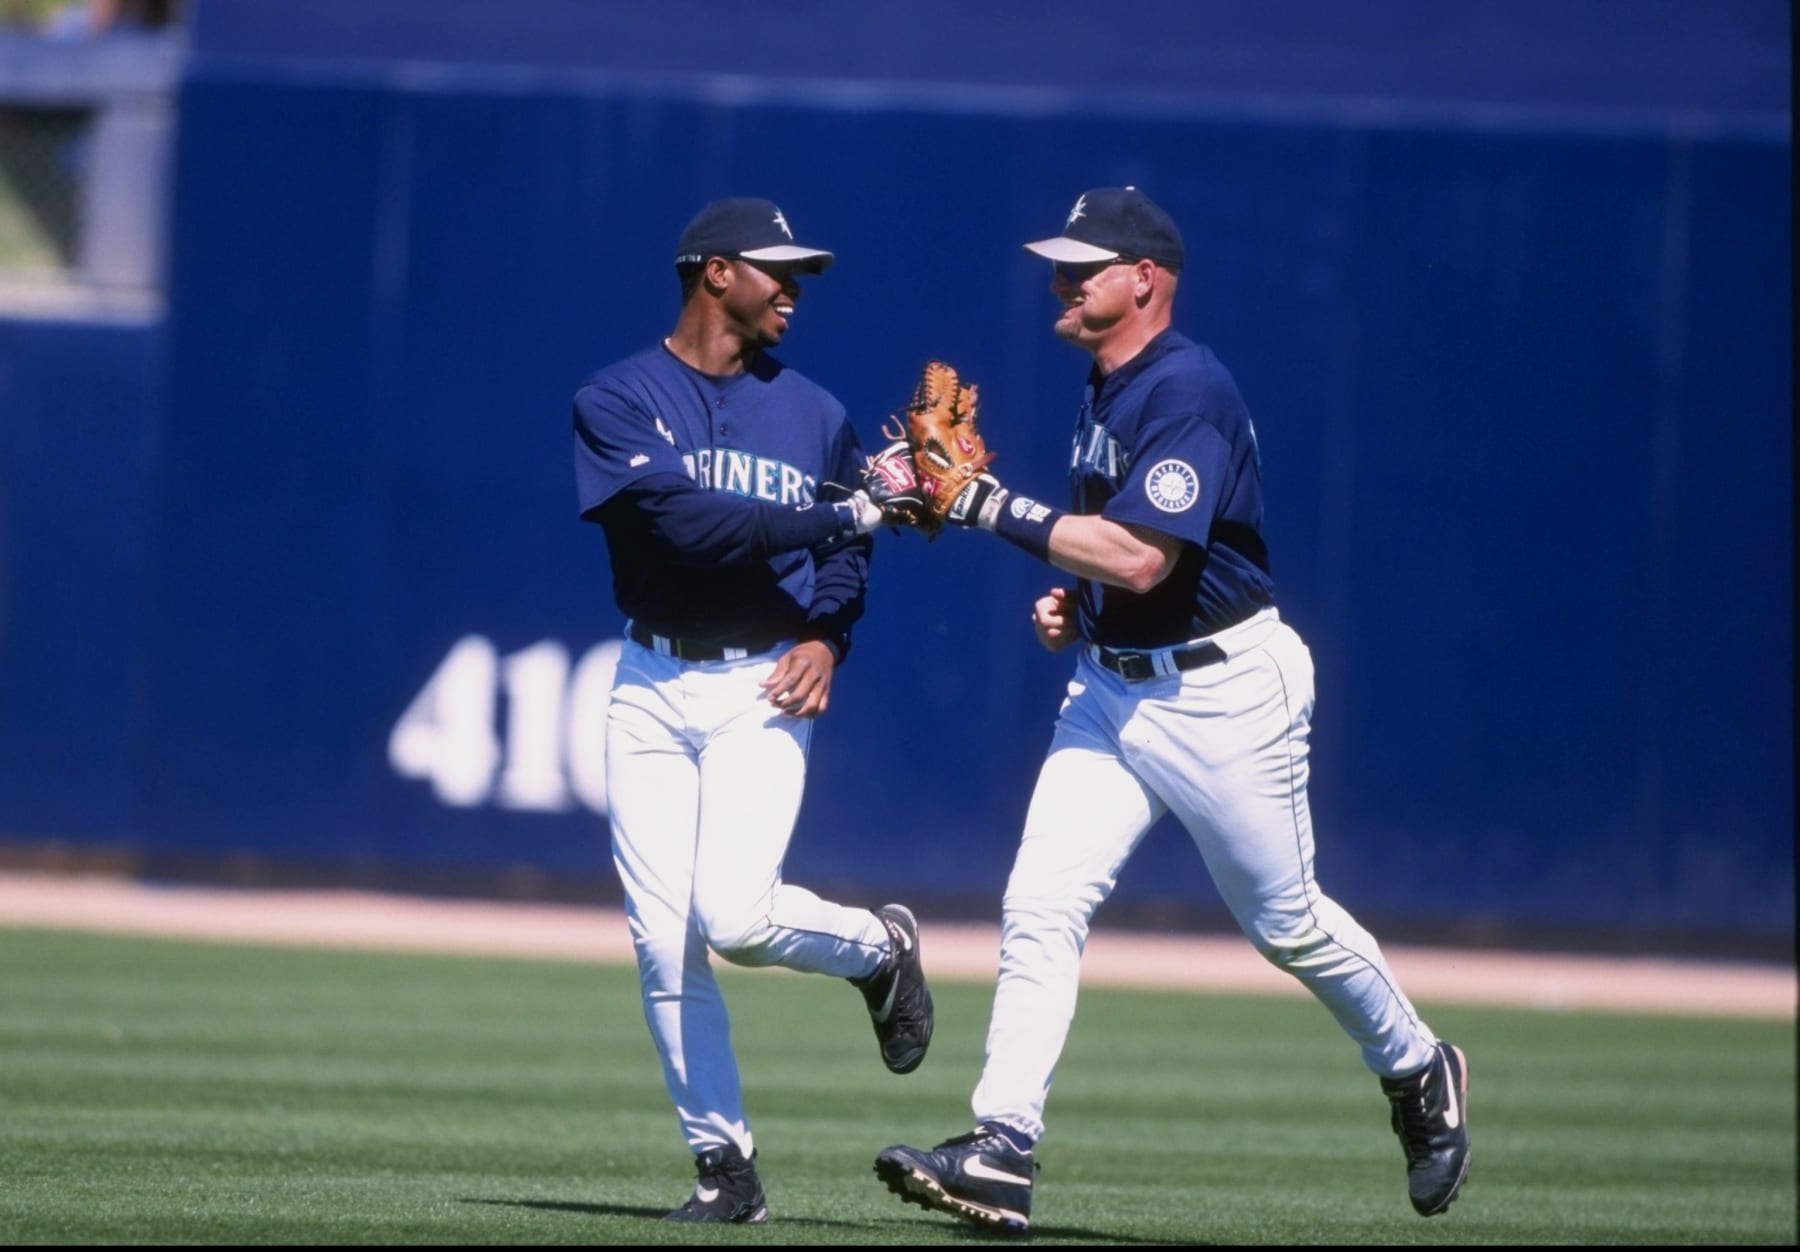 Jay Buhner and brother Shawn Buhner of the Seattle Mariners during